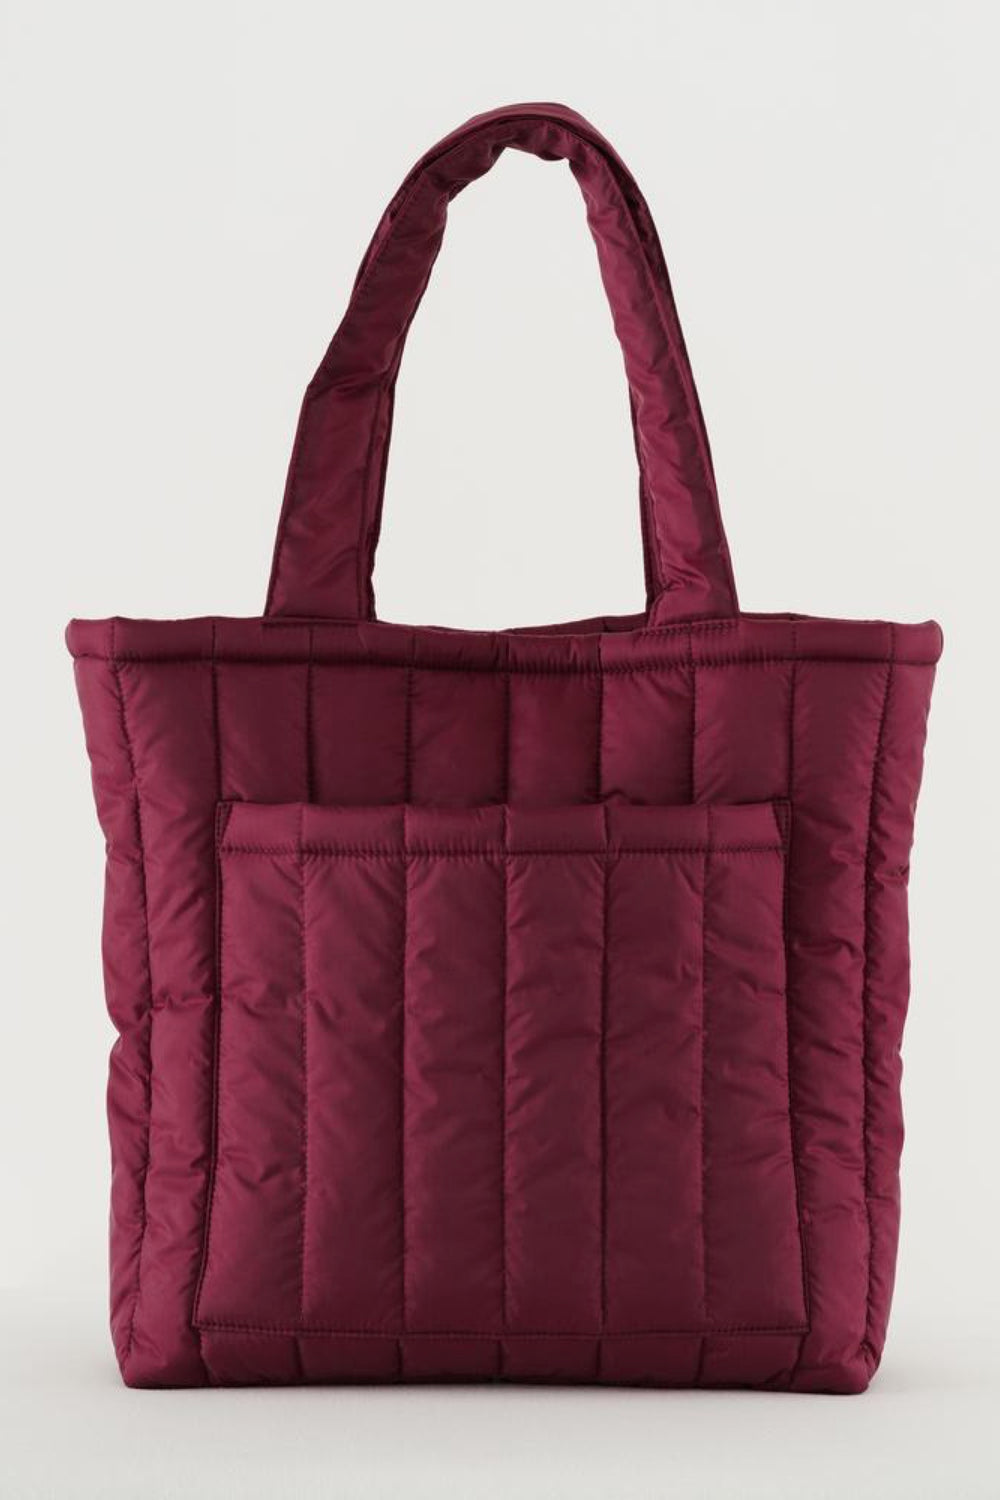 Cranberry Puffy Tote